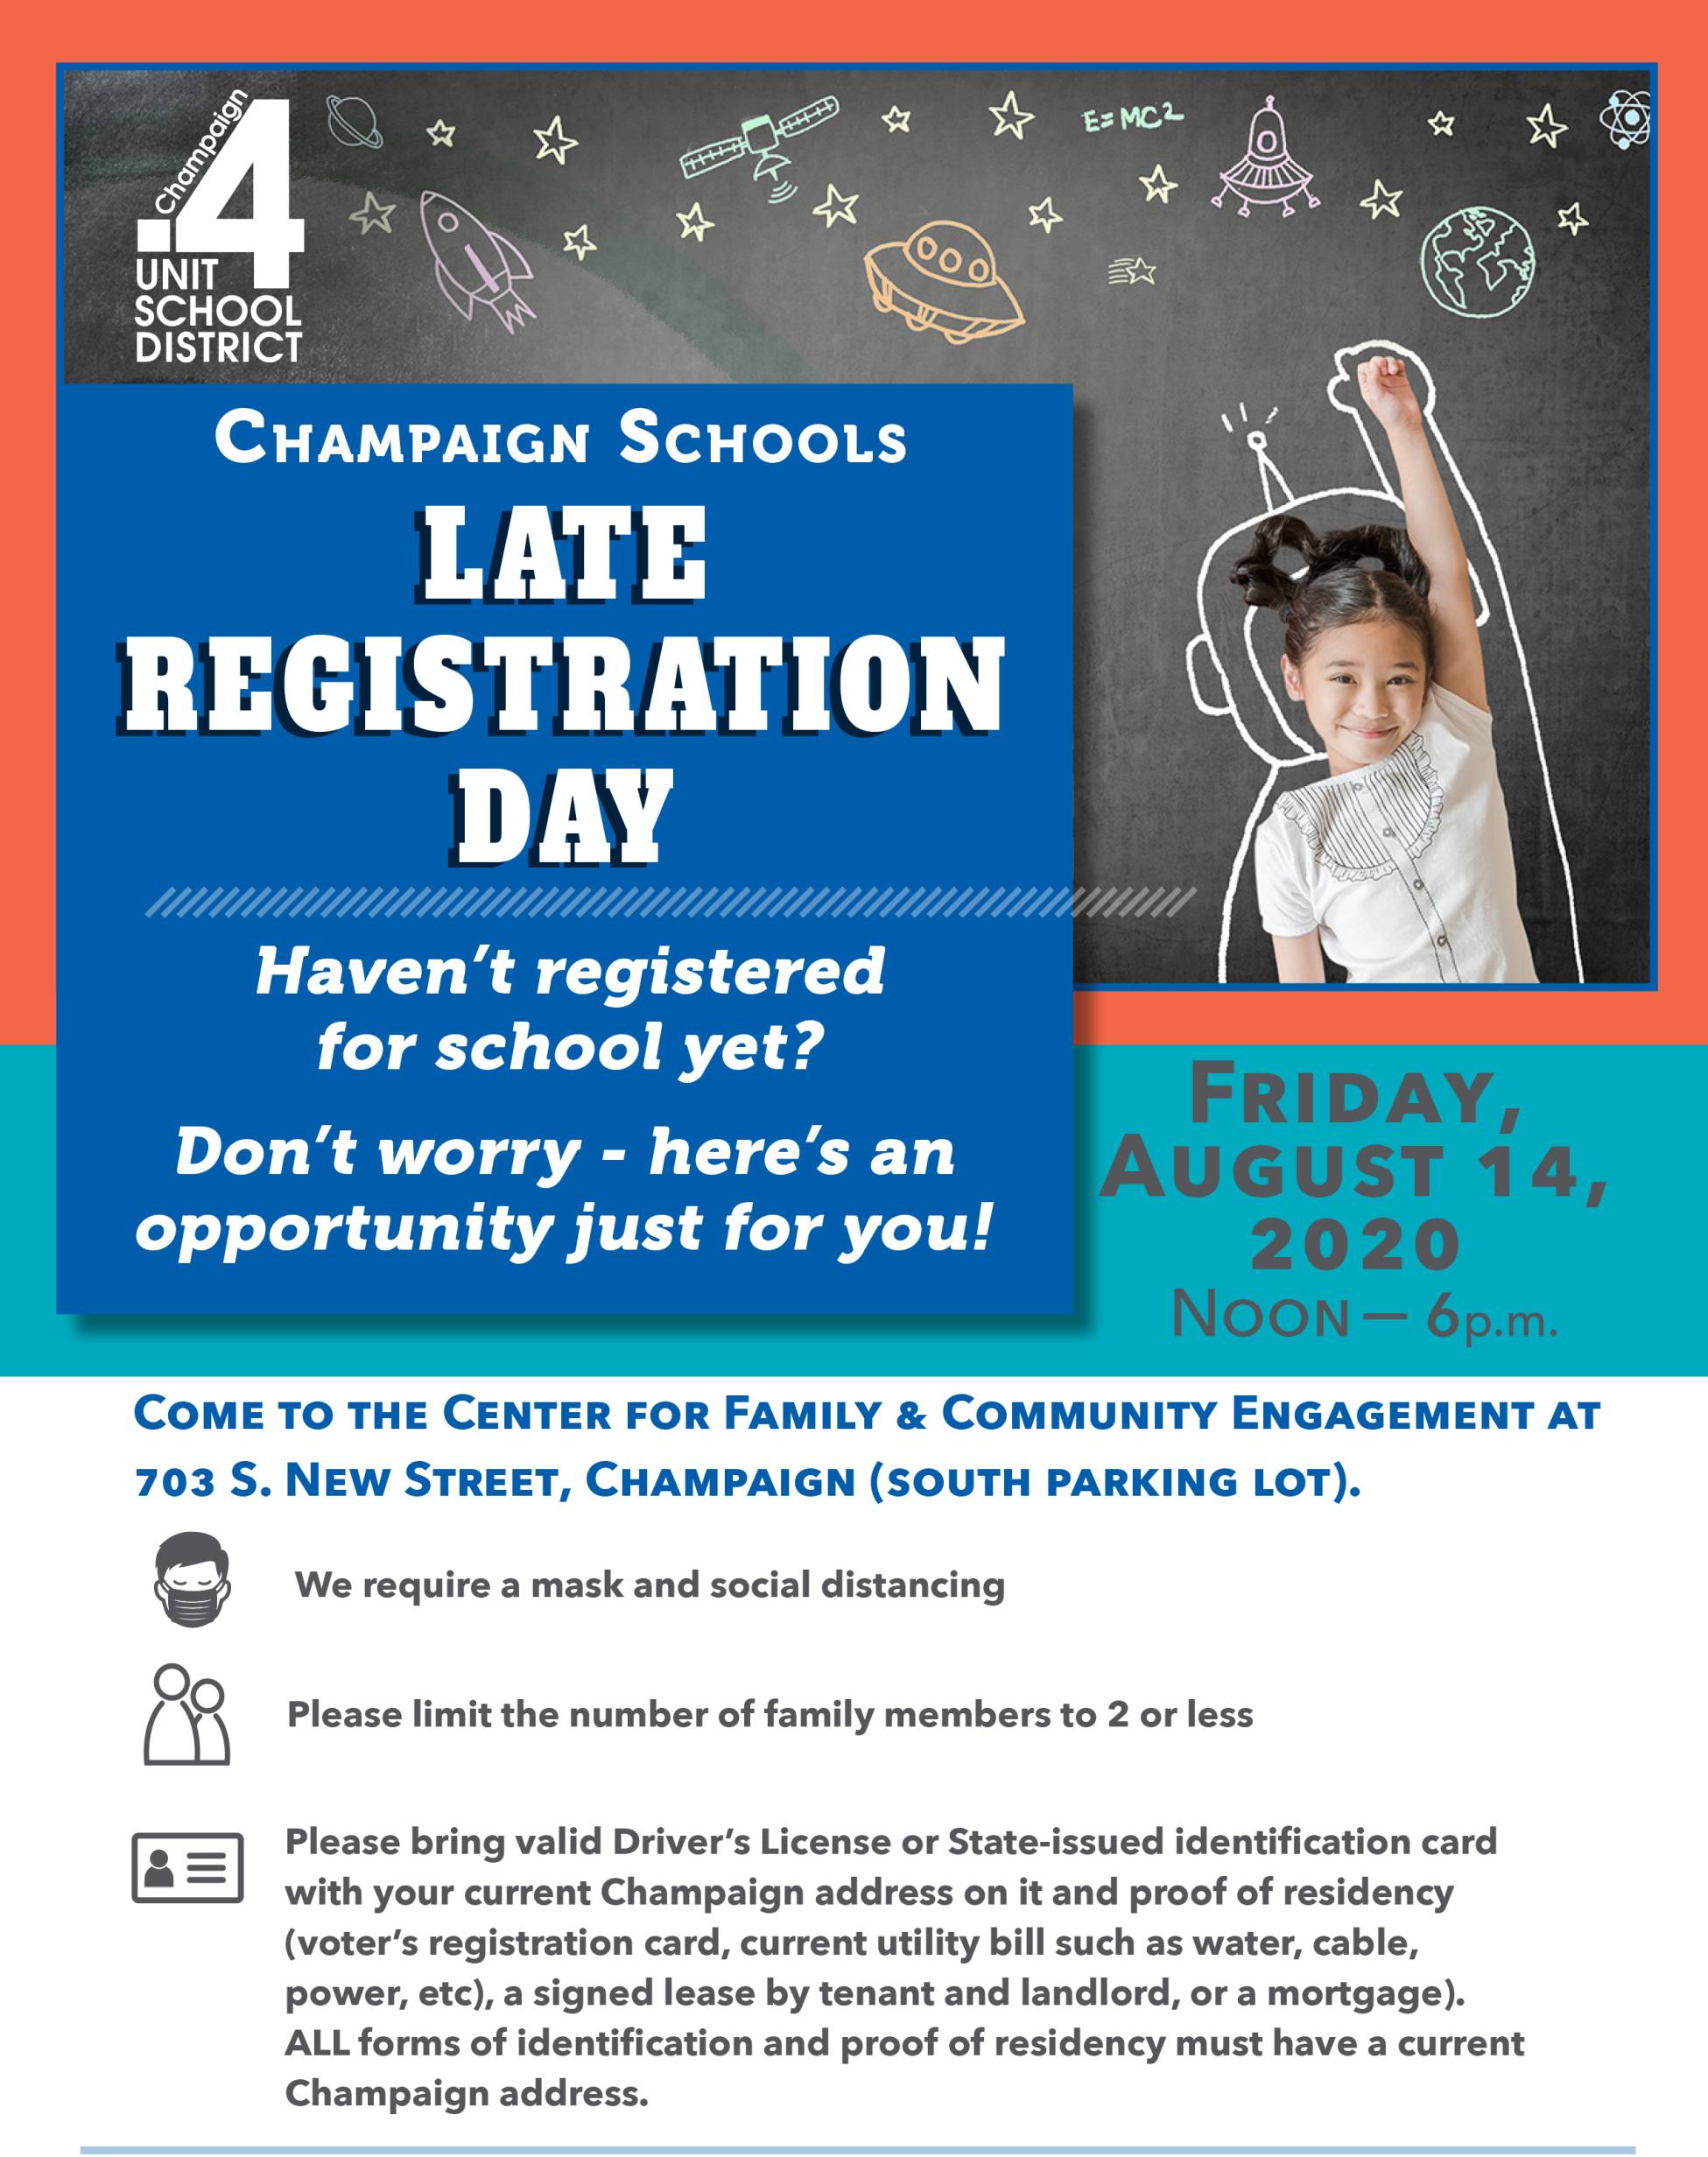 Graphic for CHAMPIAGN SCHOOLS LATE REGISTRATION DAY, with a orange and blue border. There's a child photoshopped into the graphic to the right. Image by Champaign Unit 4.